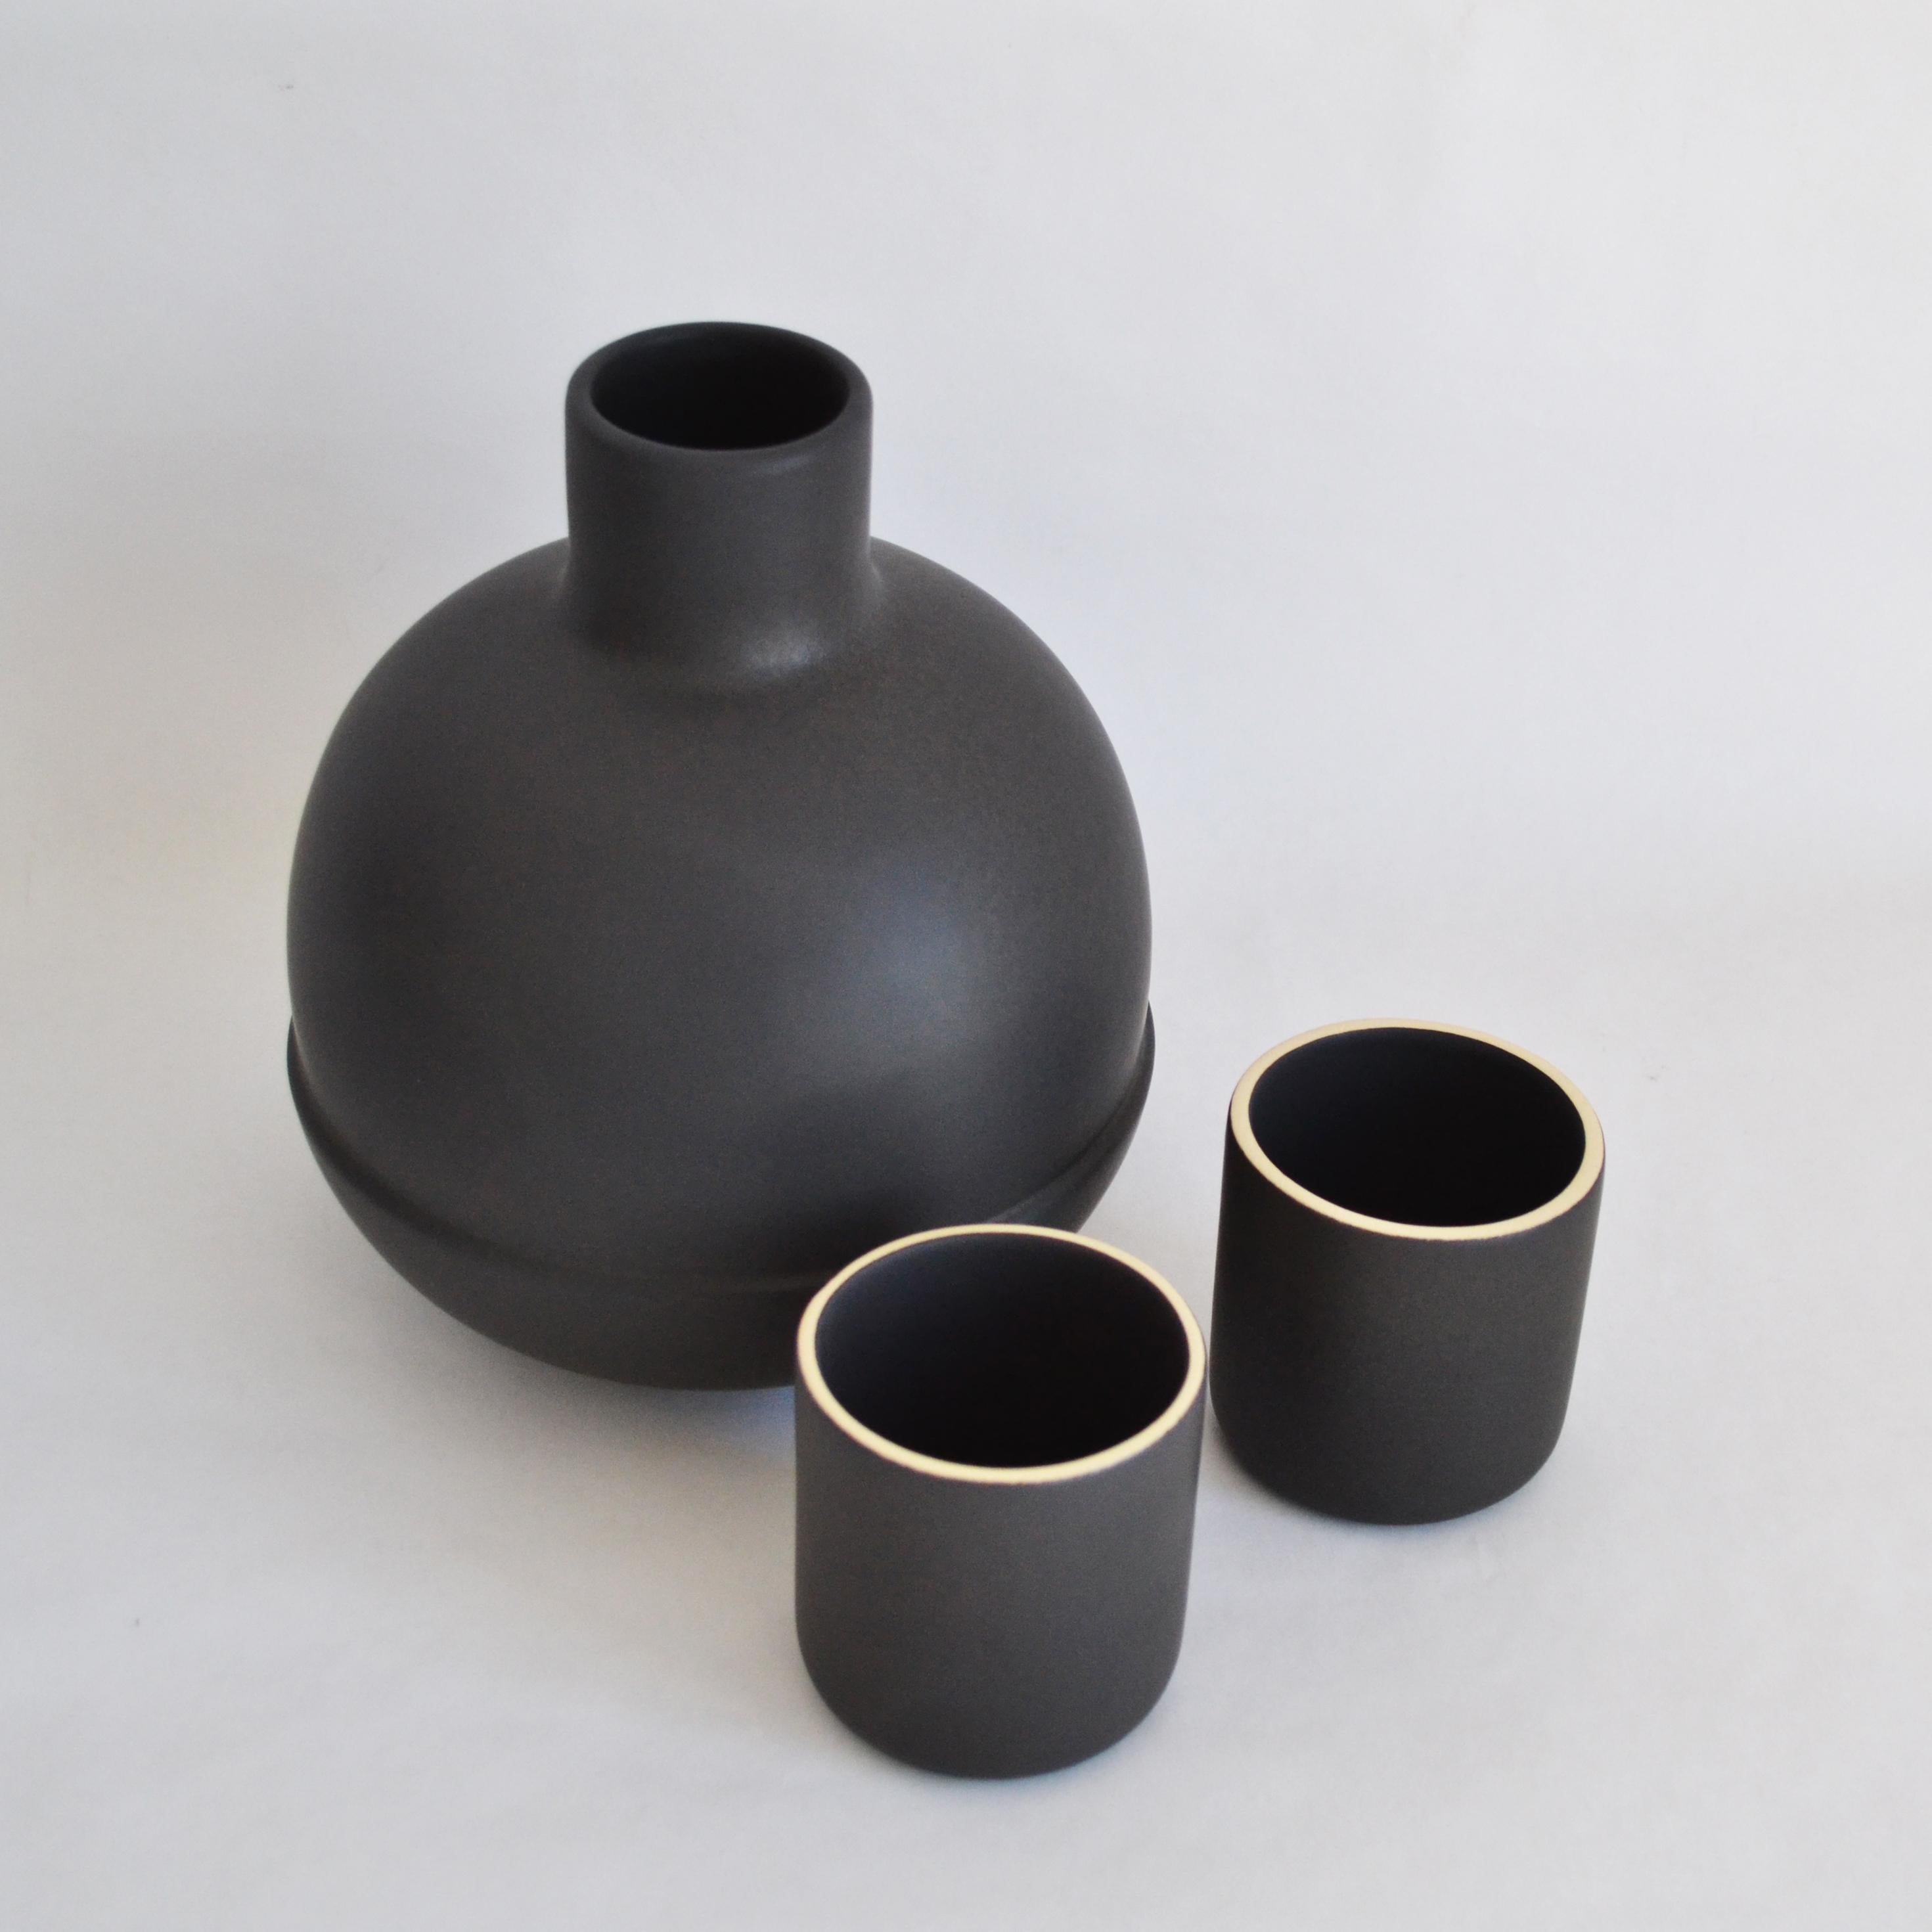 Mexican Black Ceramic Carafe and Cups Inspired in traditional Pitchers from Mexico.  For Sale